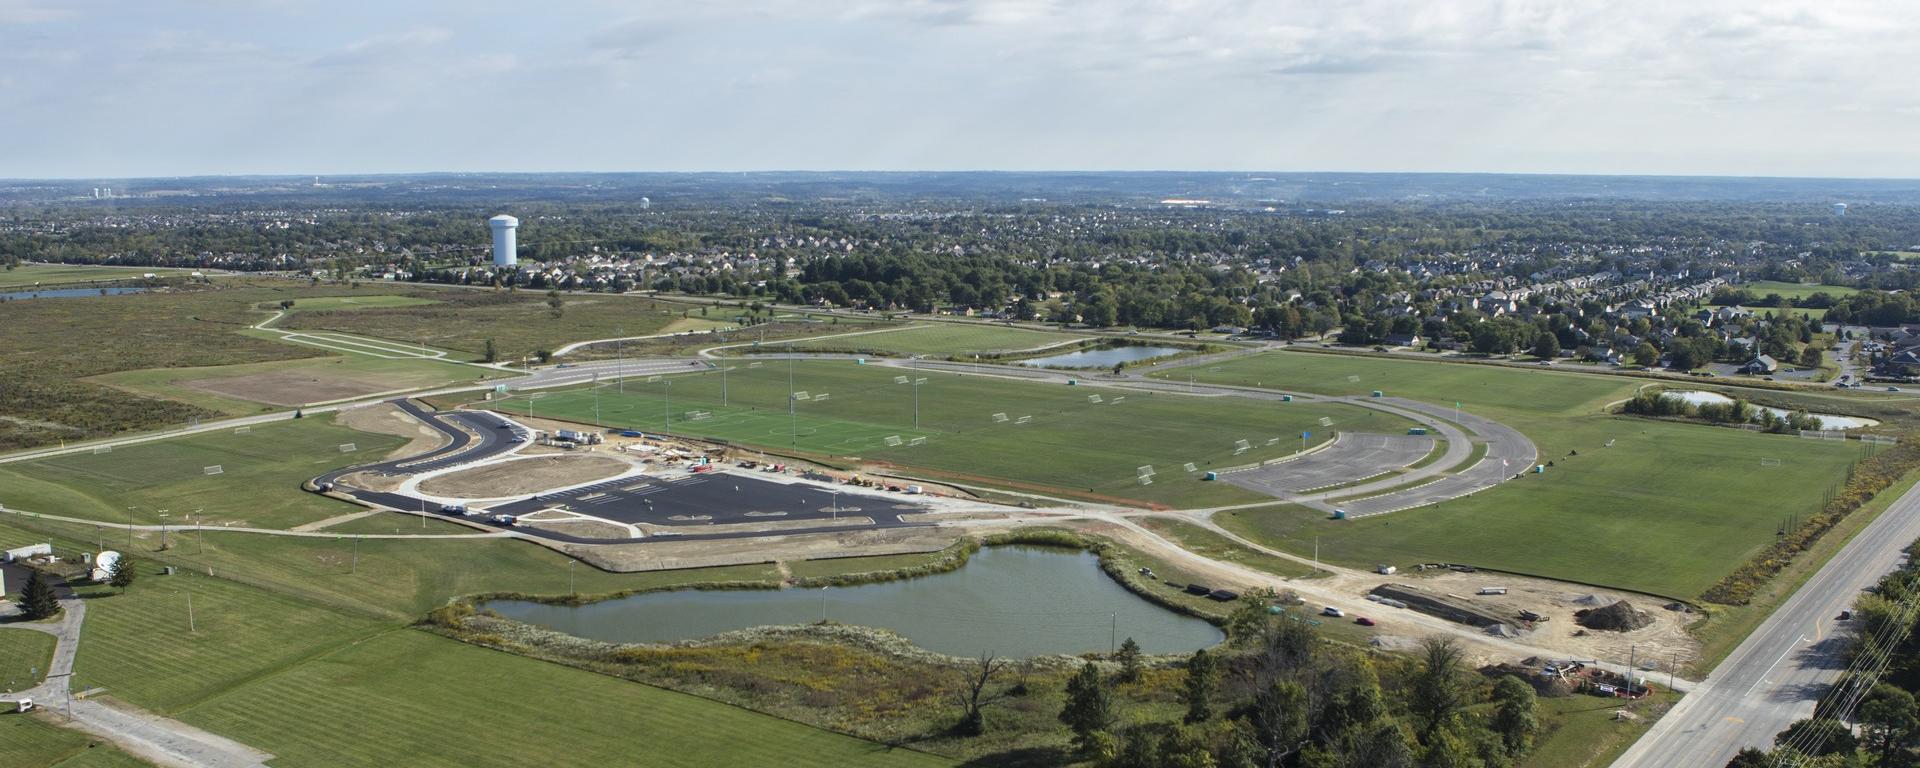 aerial of walking paths and athletic fields